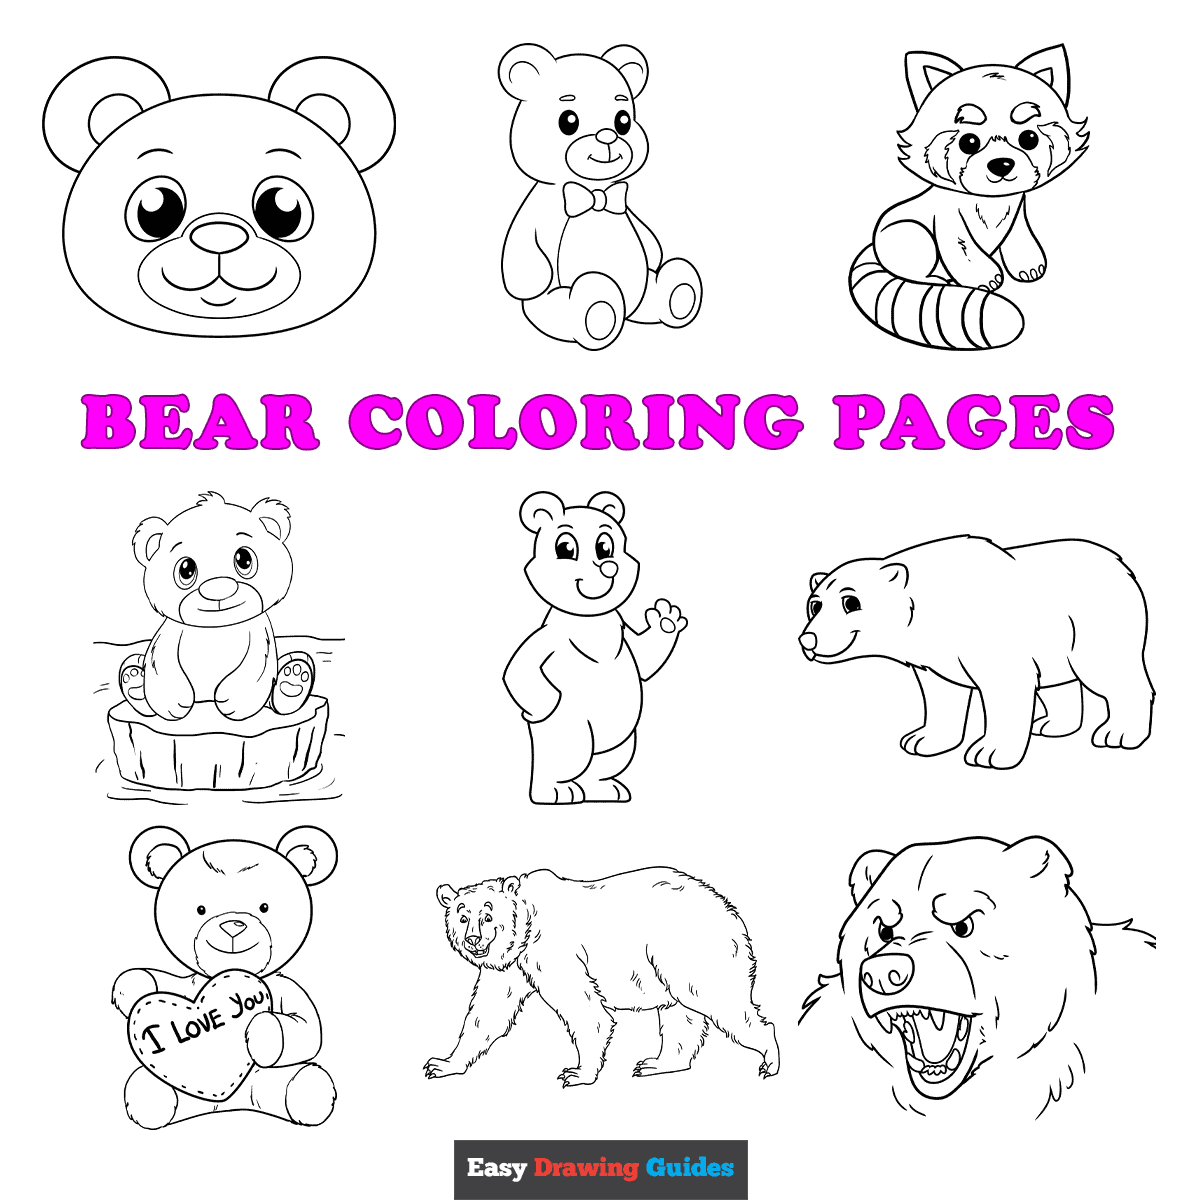 Bear drawings easy drawing guides